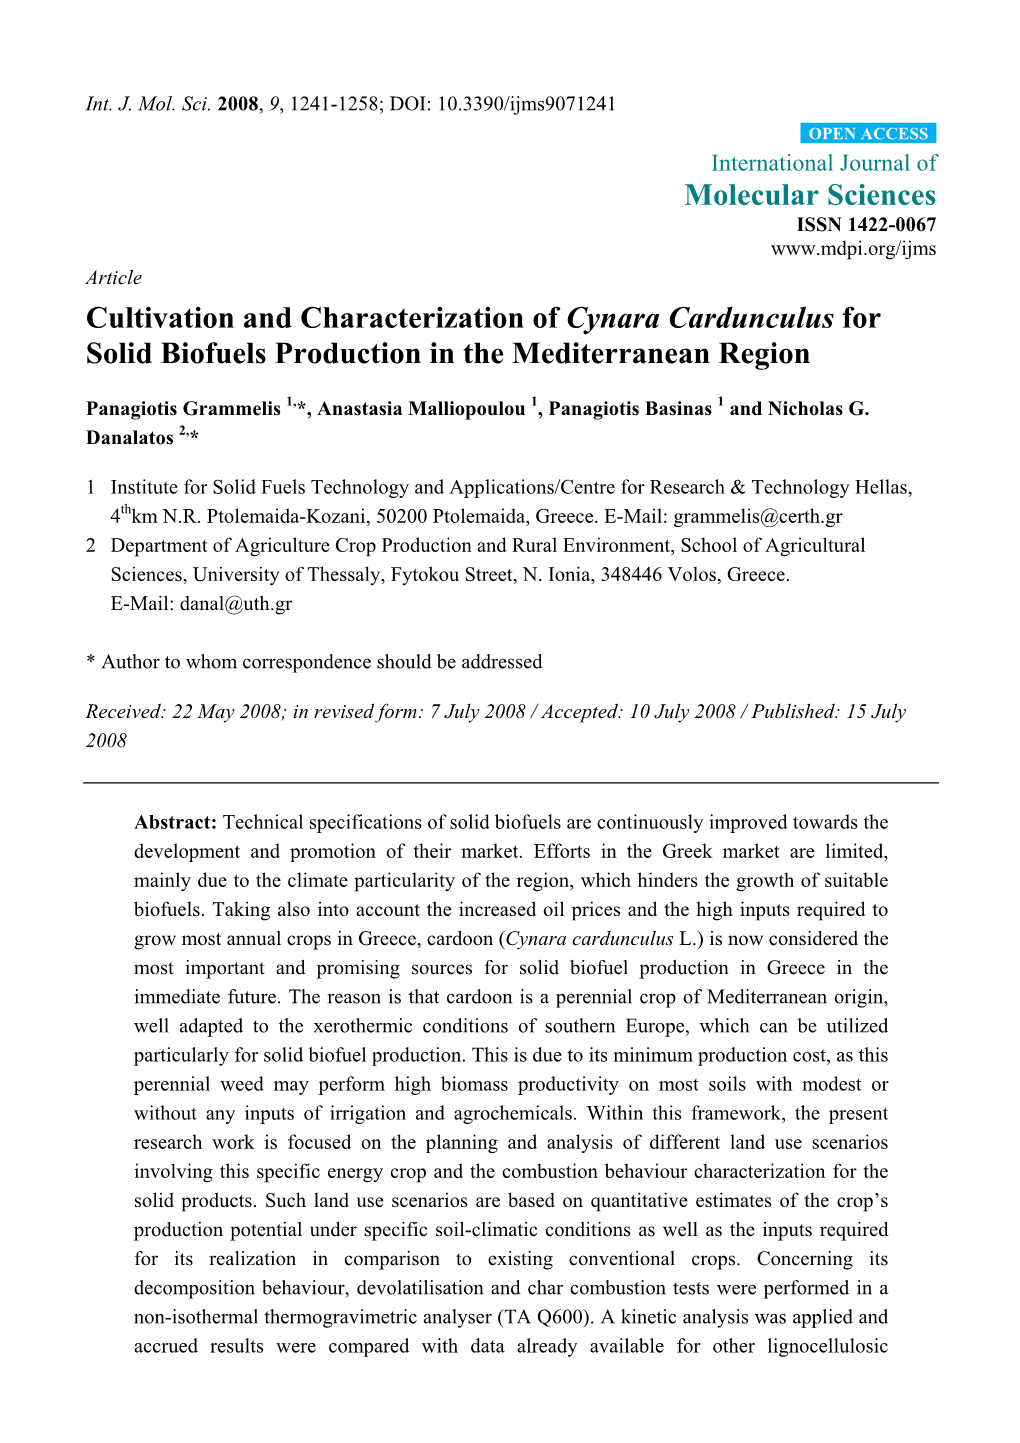 Cultivation and Characterization of Cynara Cardunculus for Solid Biofuels Production in the Mediterranean Region